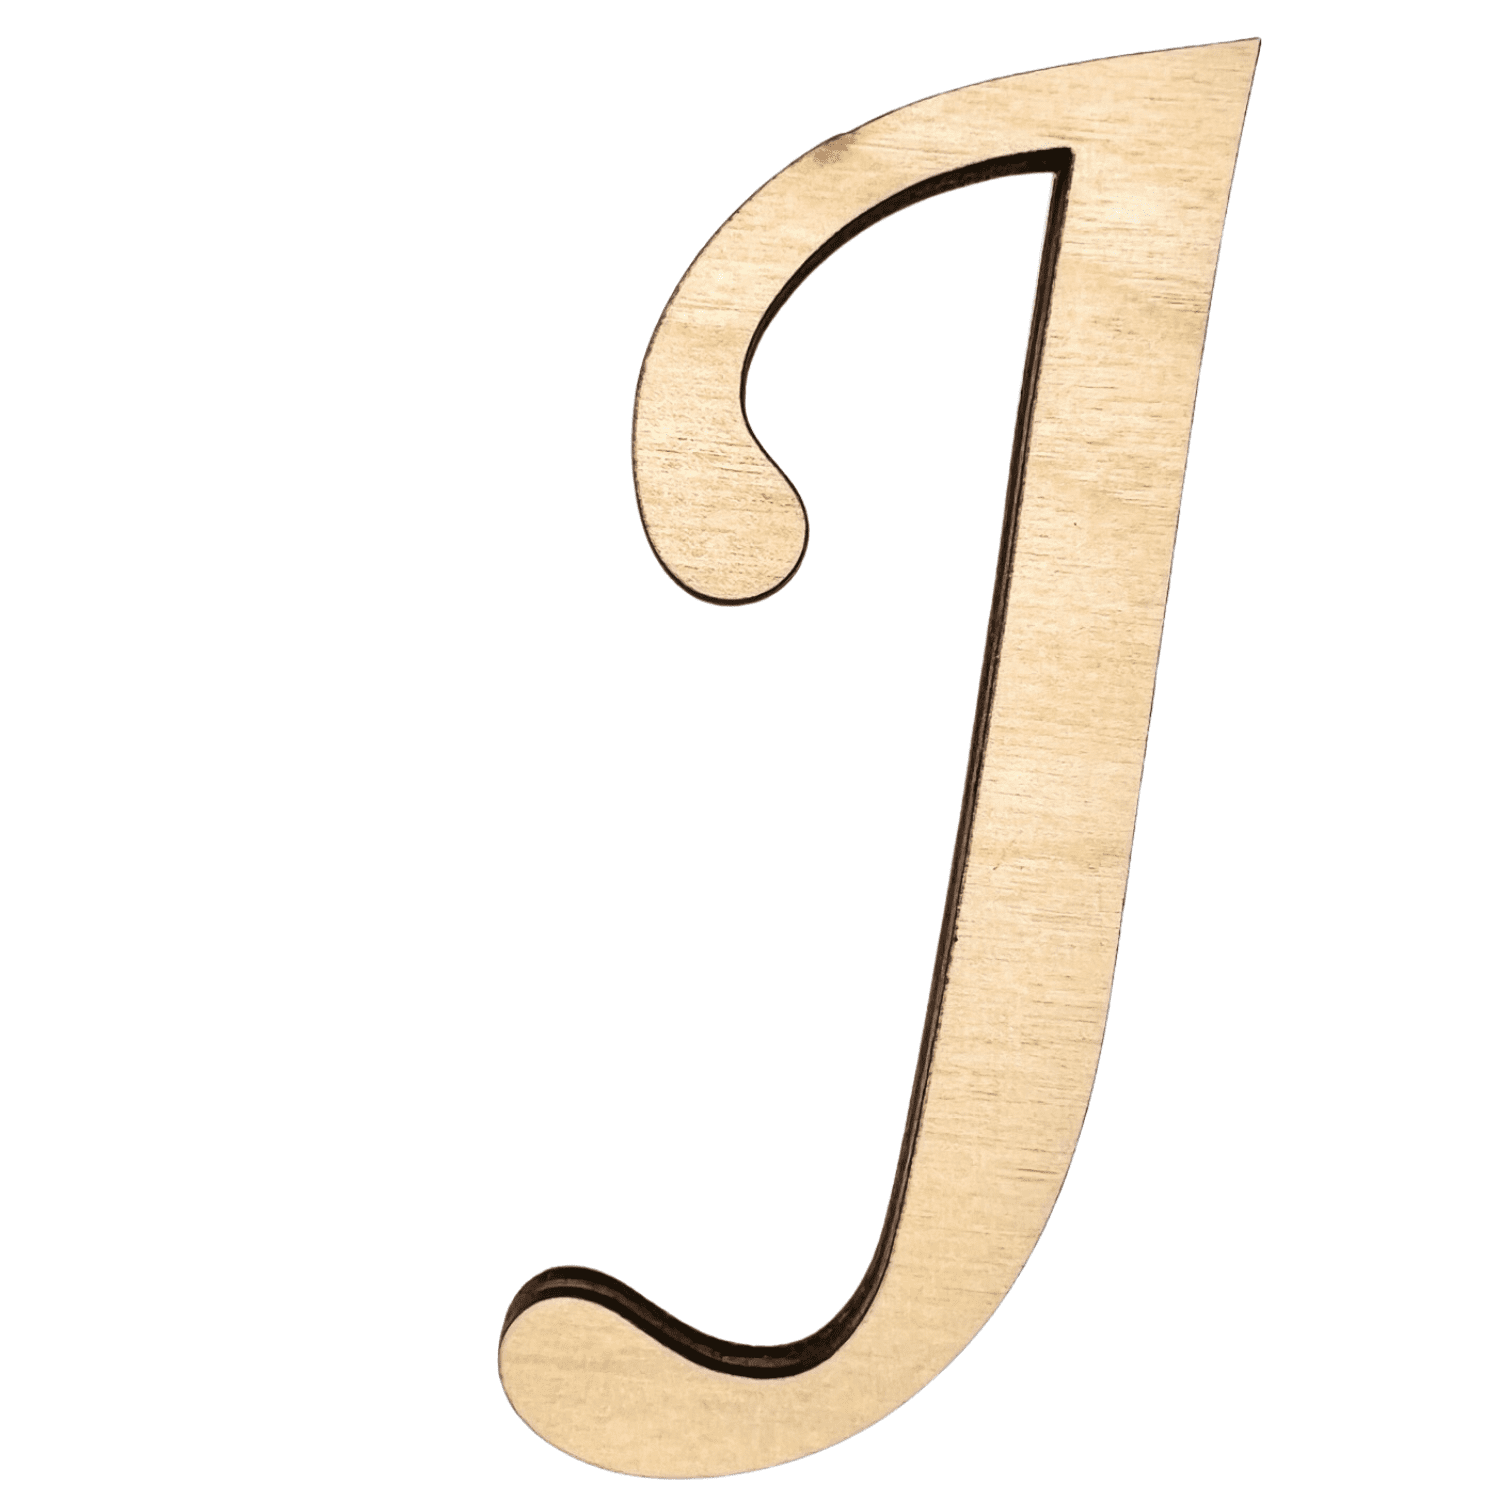  Fuyit Wood Letters J, 12 Inch Tall 1/4 Inch Thick Blank  Unfinished Wooden Letter for DIY Crafts, Painting, Wall Arts, Home & Party  Decor : Everything Else